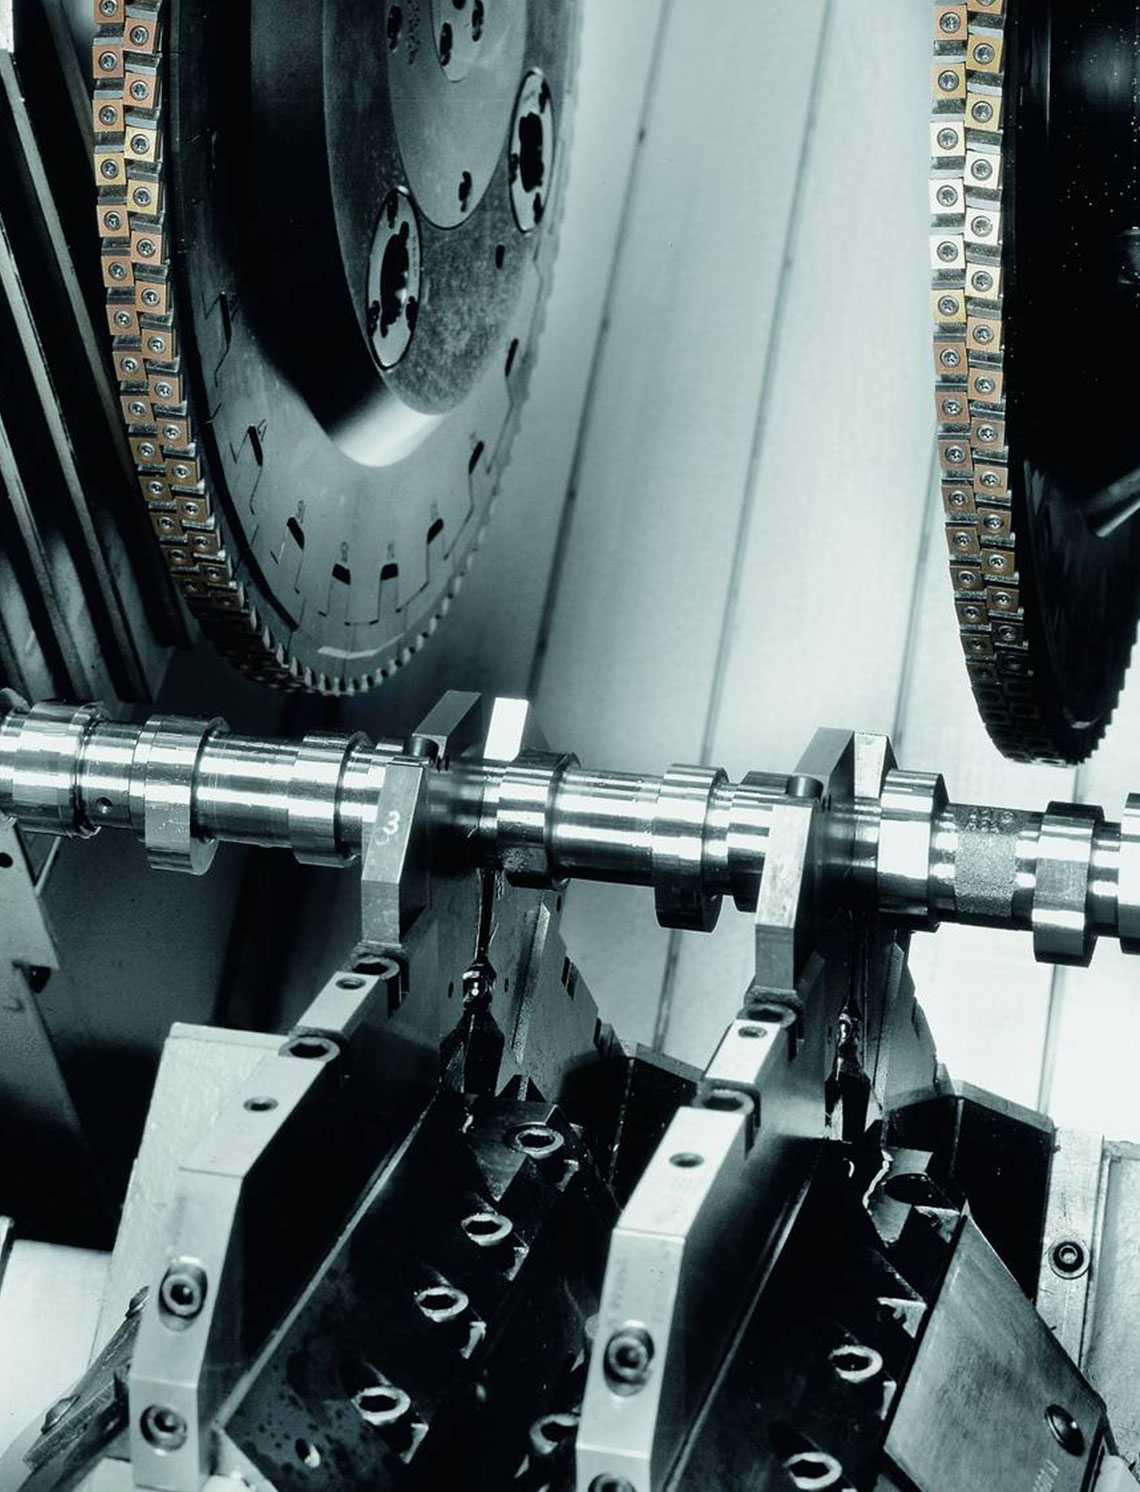 Camshaft production systems